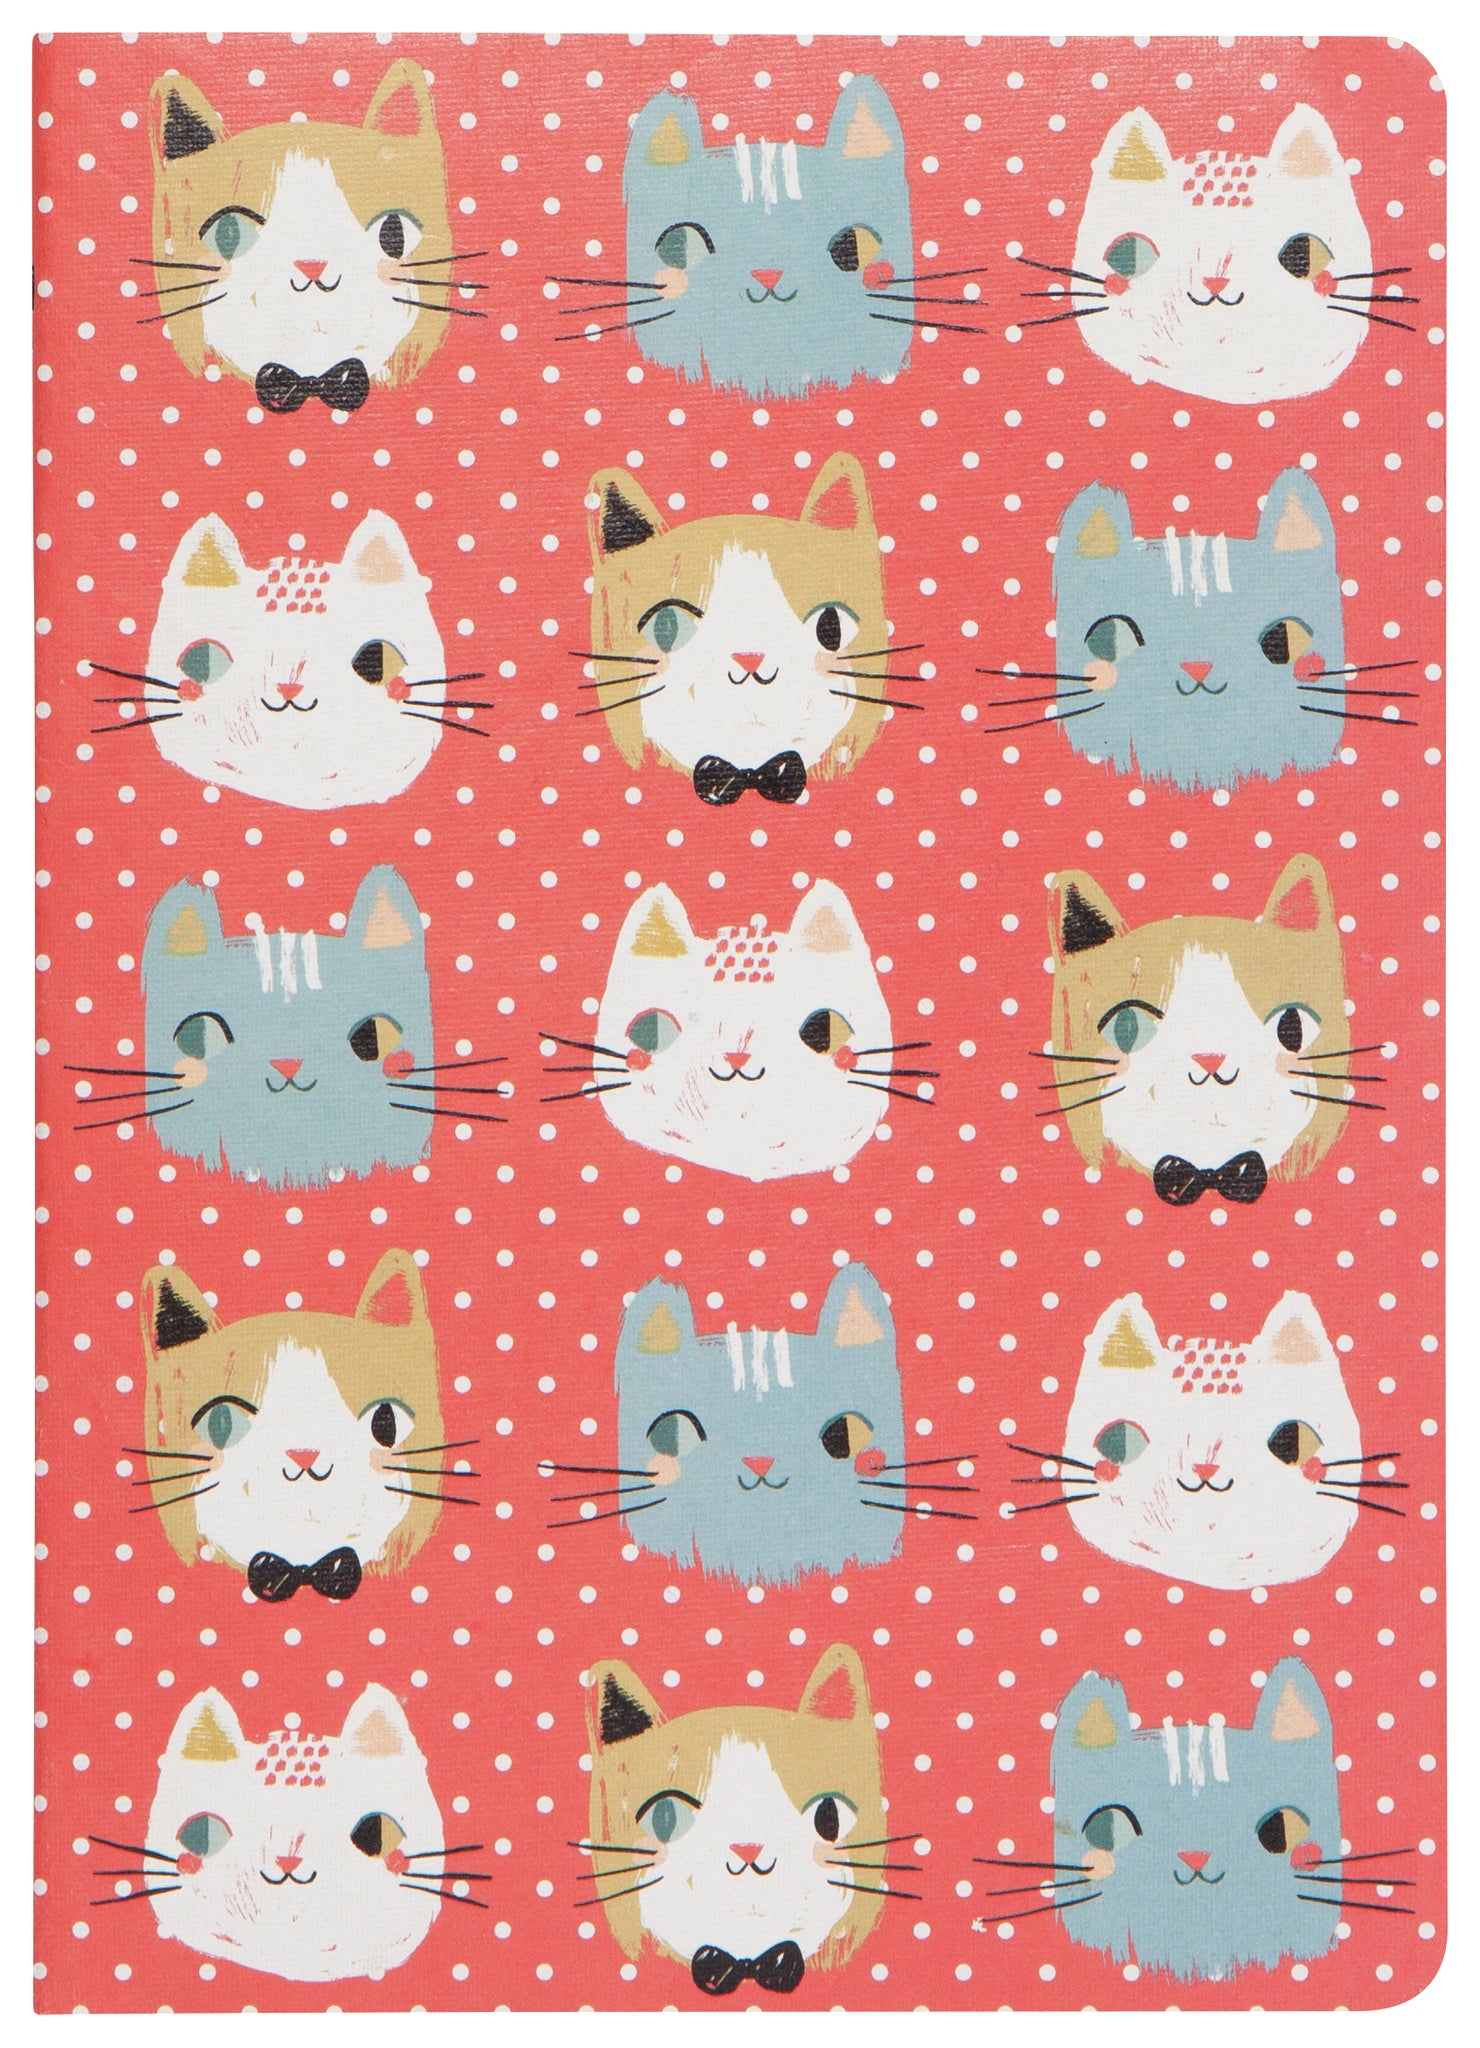 Meow Meow Notebook Set of 2